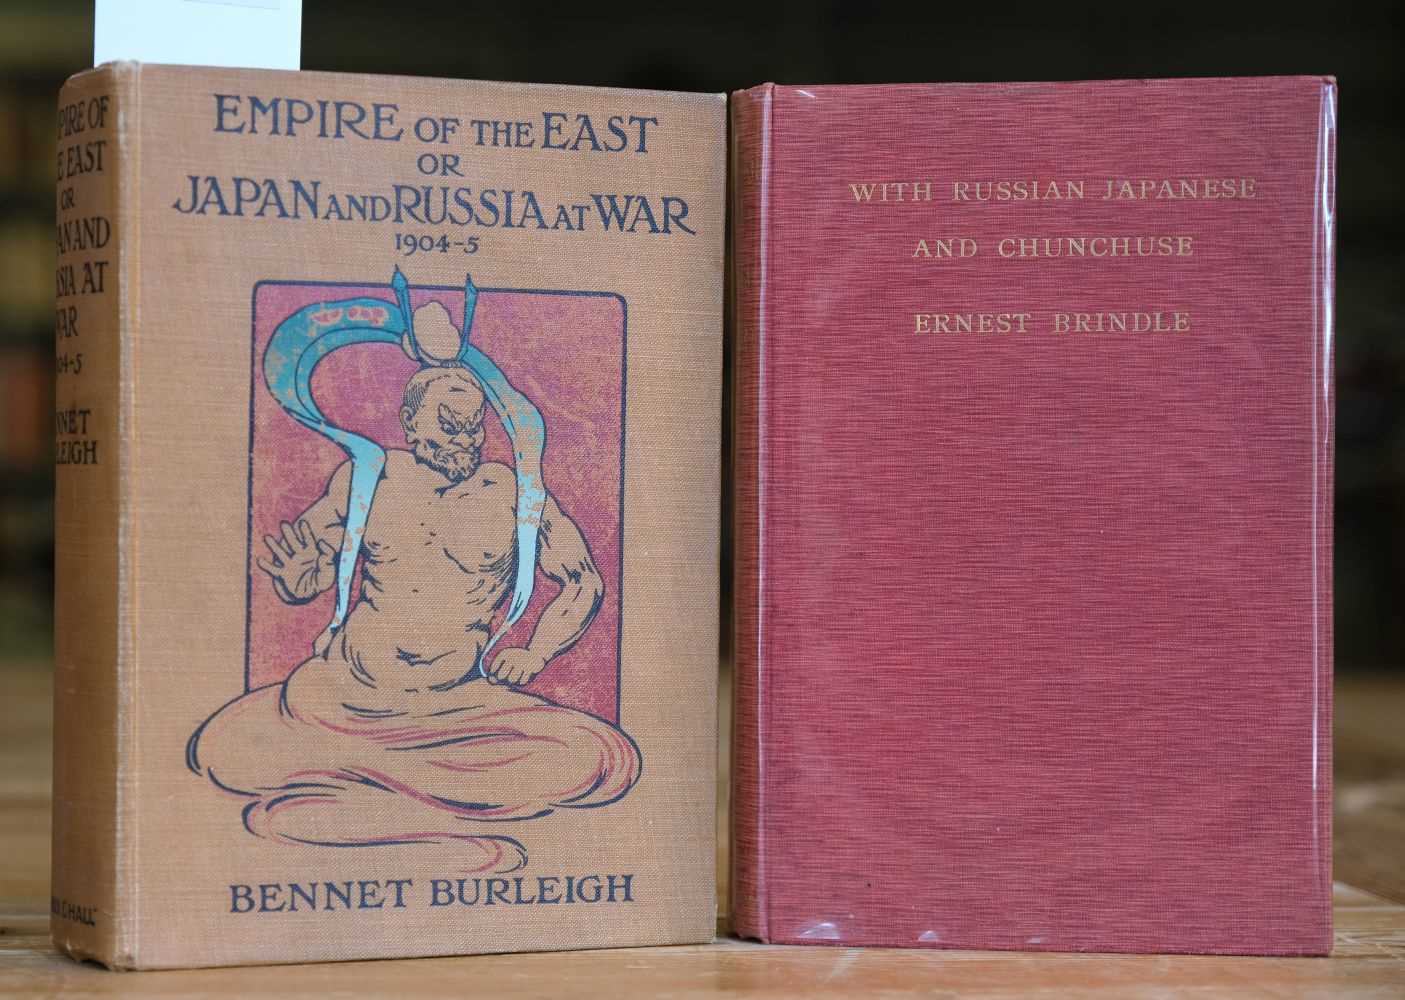 Lot 4 - Burleigh (Bennet). Empire of the East, 1905